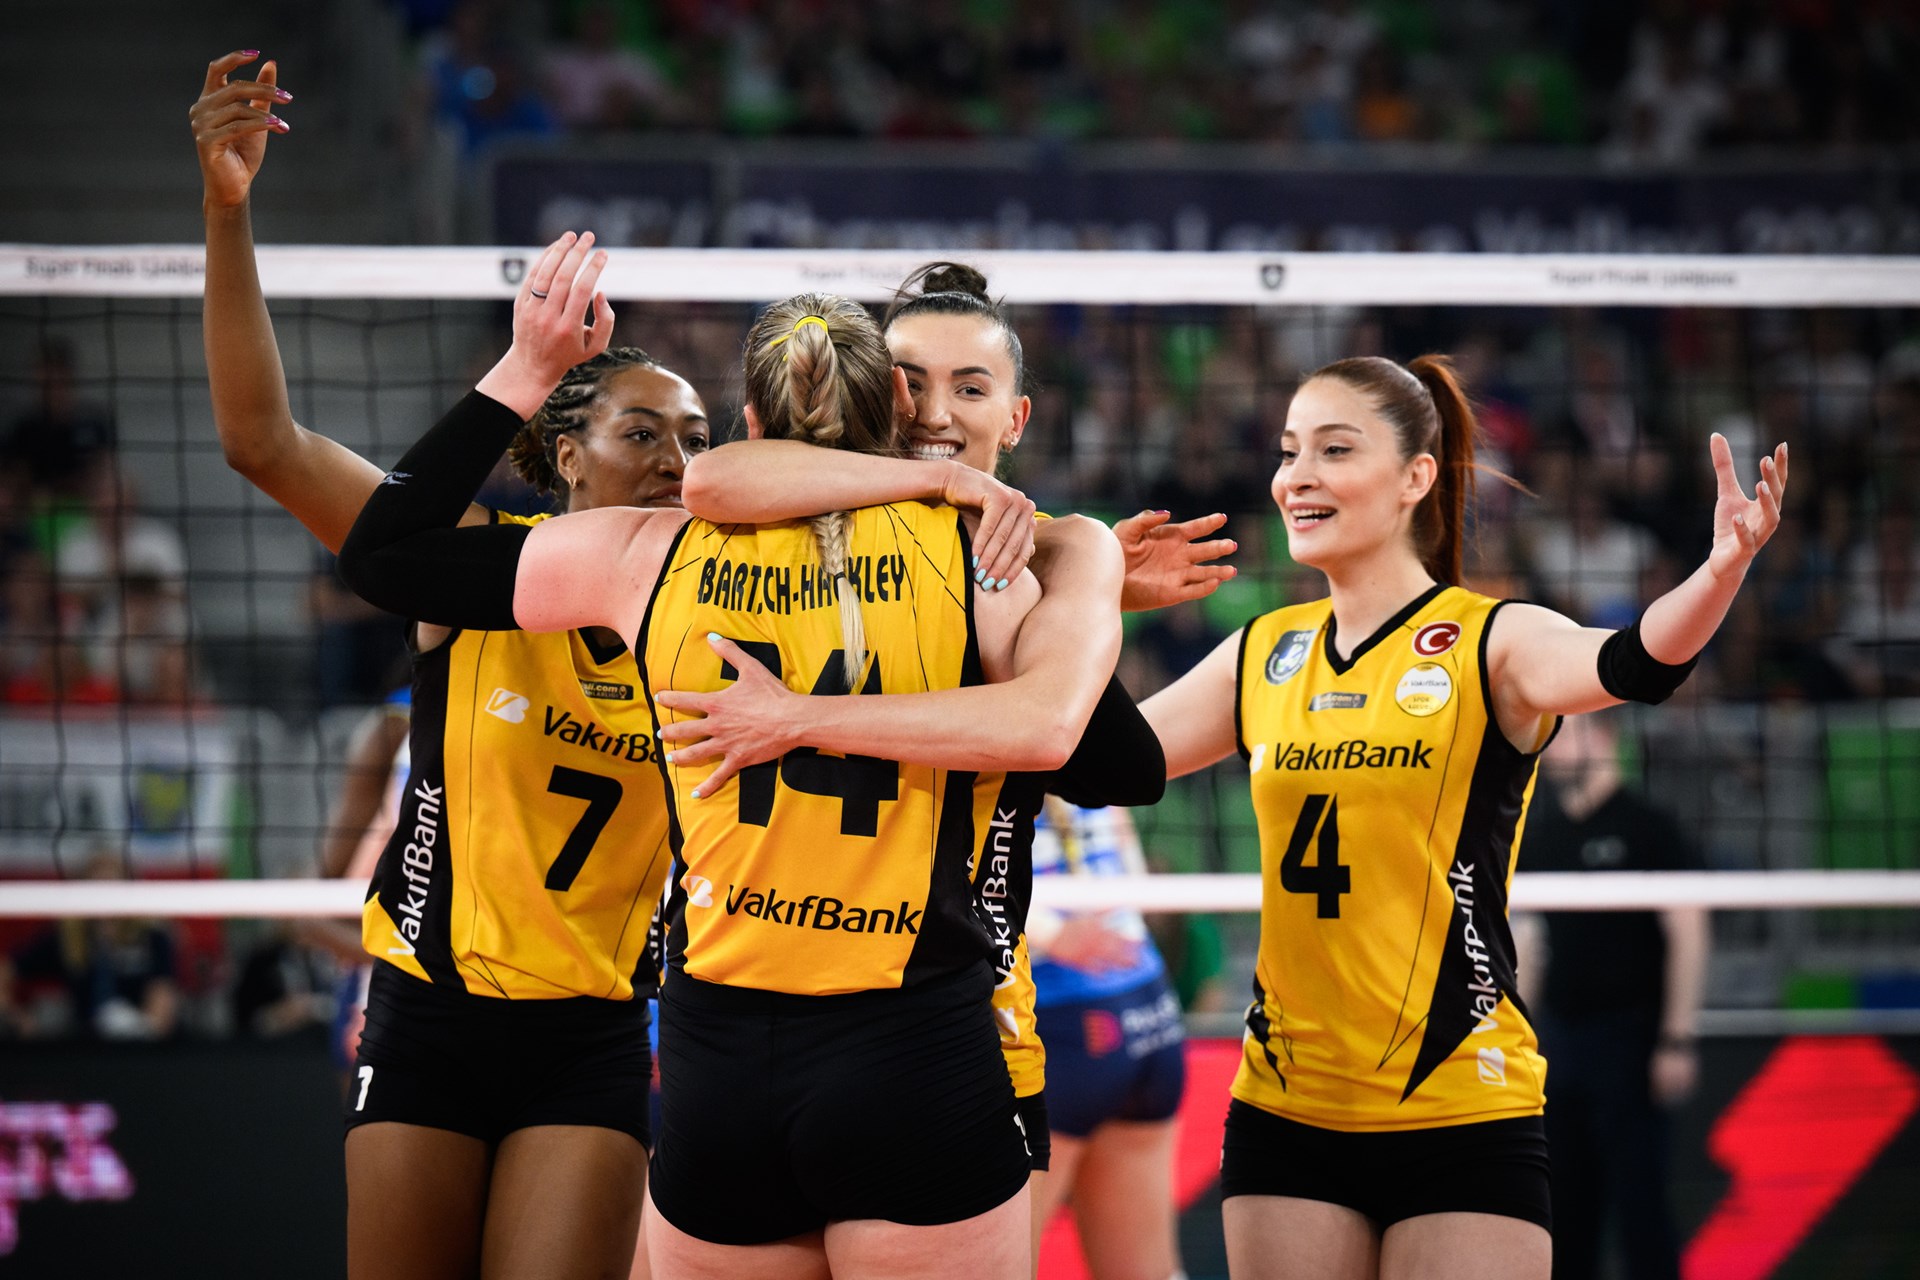 Michelle Bartsch and Vakifbank win the Champions League Superfinals!